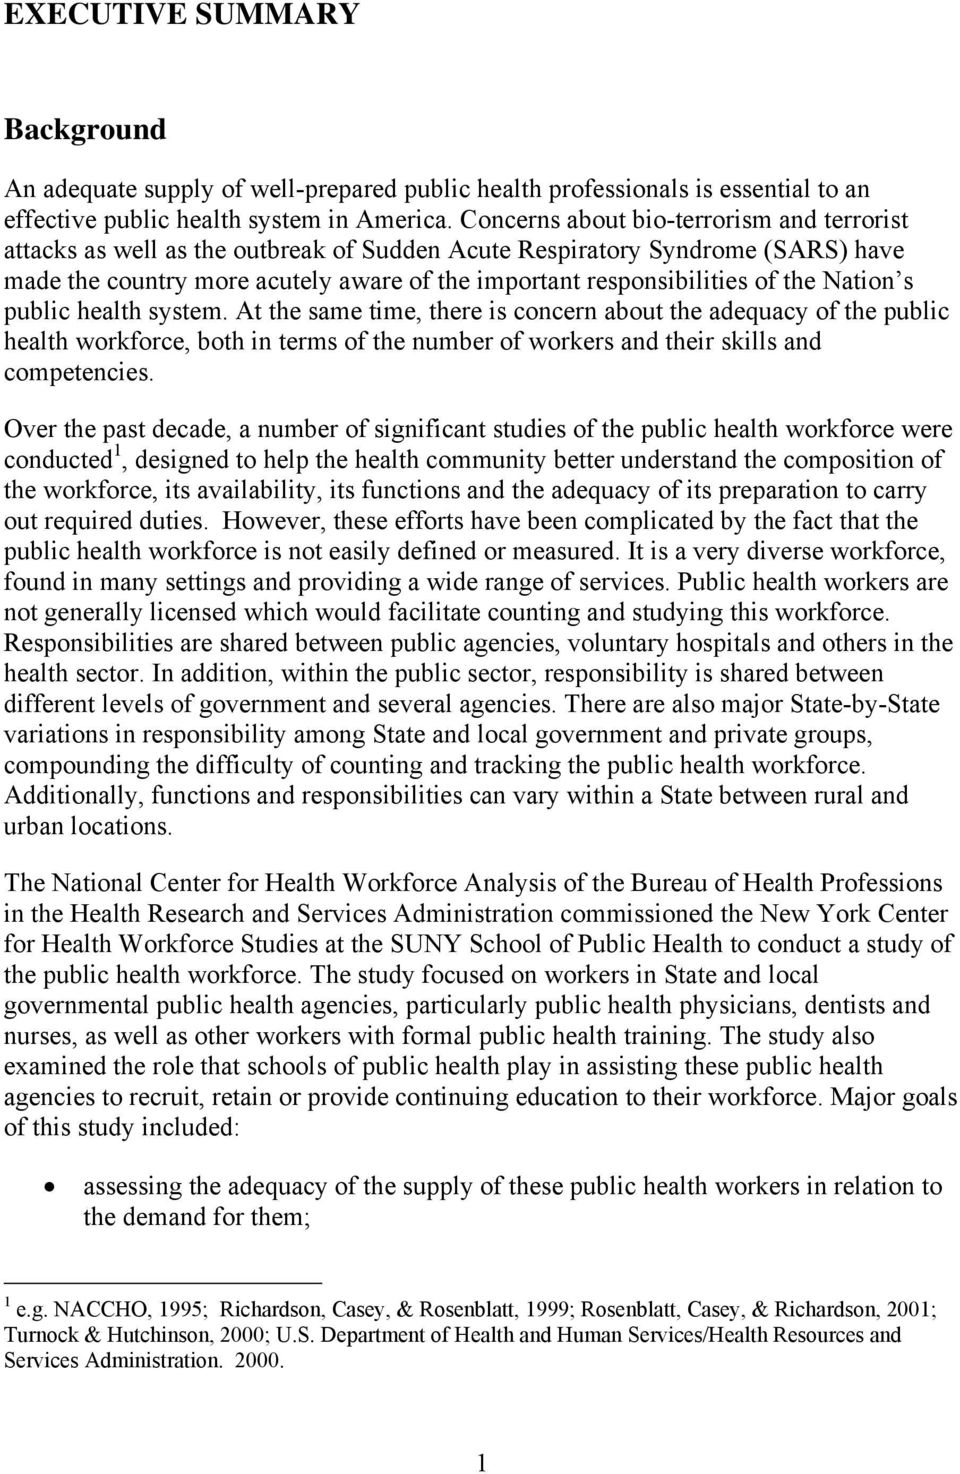 the Nation s public health system. At the same time, there is concern about the adequacy of the public health workforce, both in terms of the number of workers and their skills and competencies.